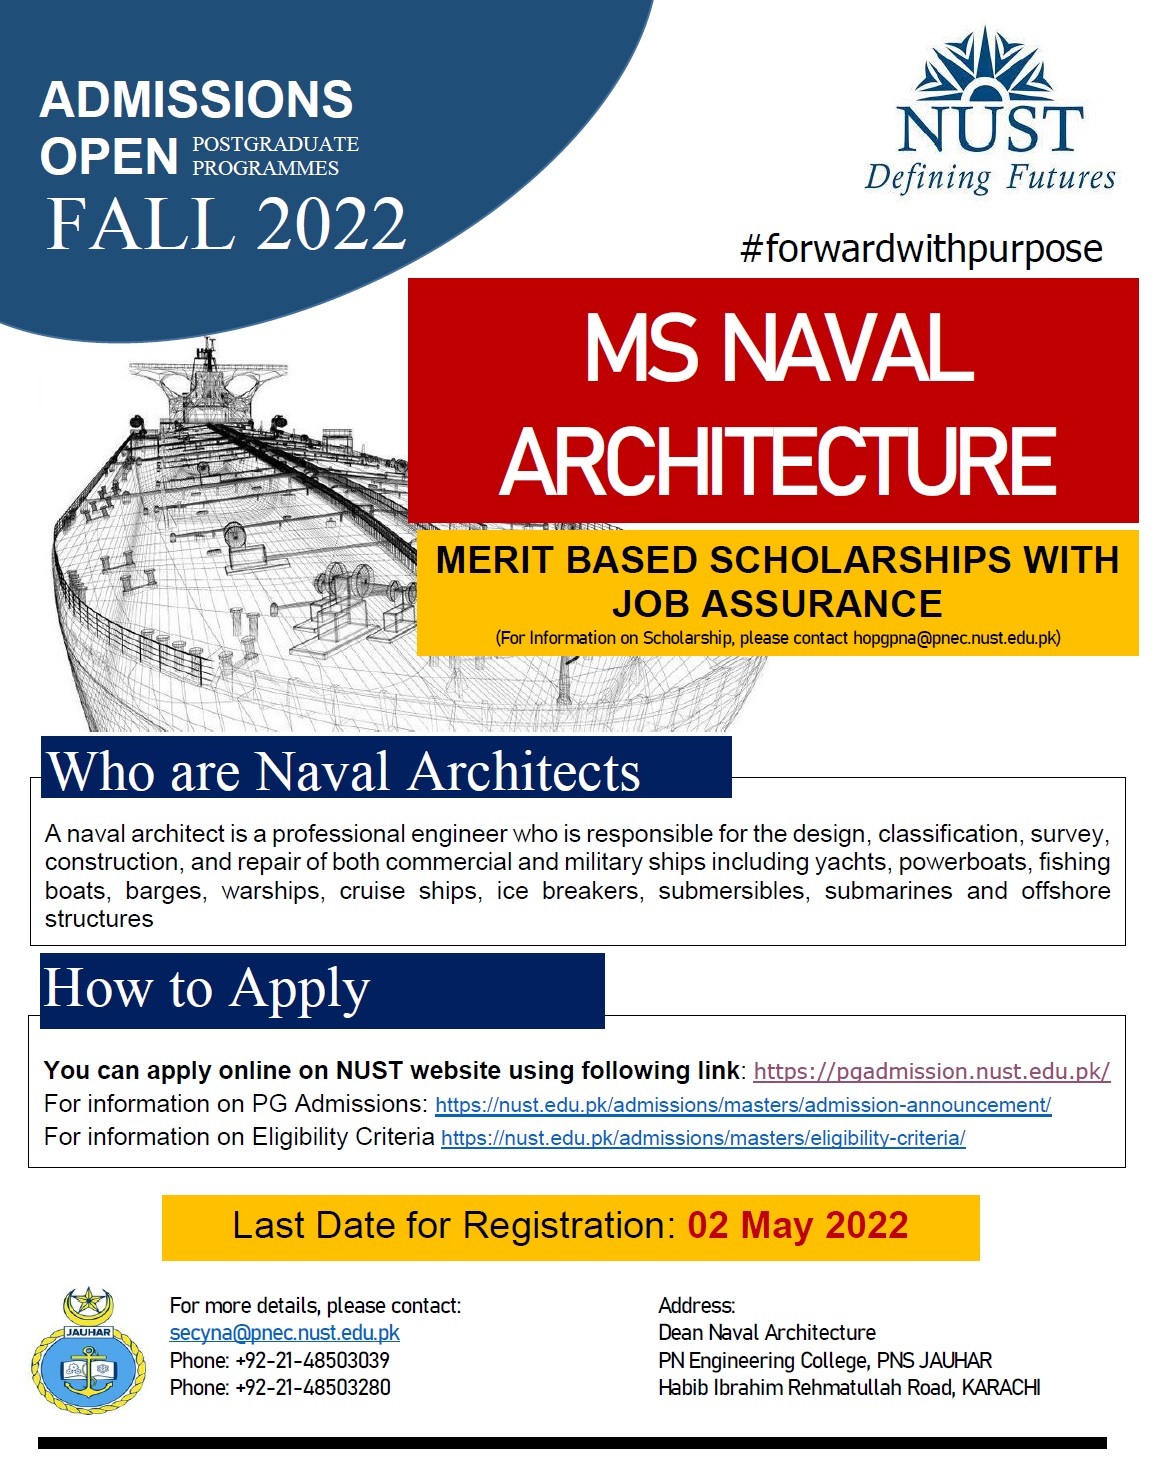 MS Naval Admissions Fall 2022